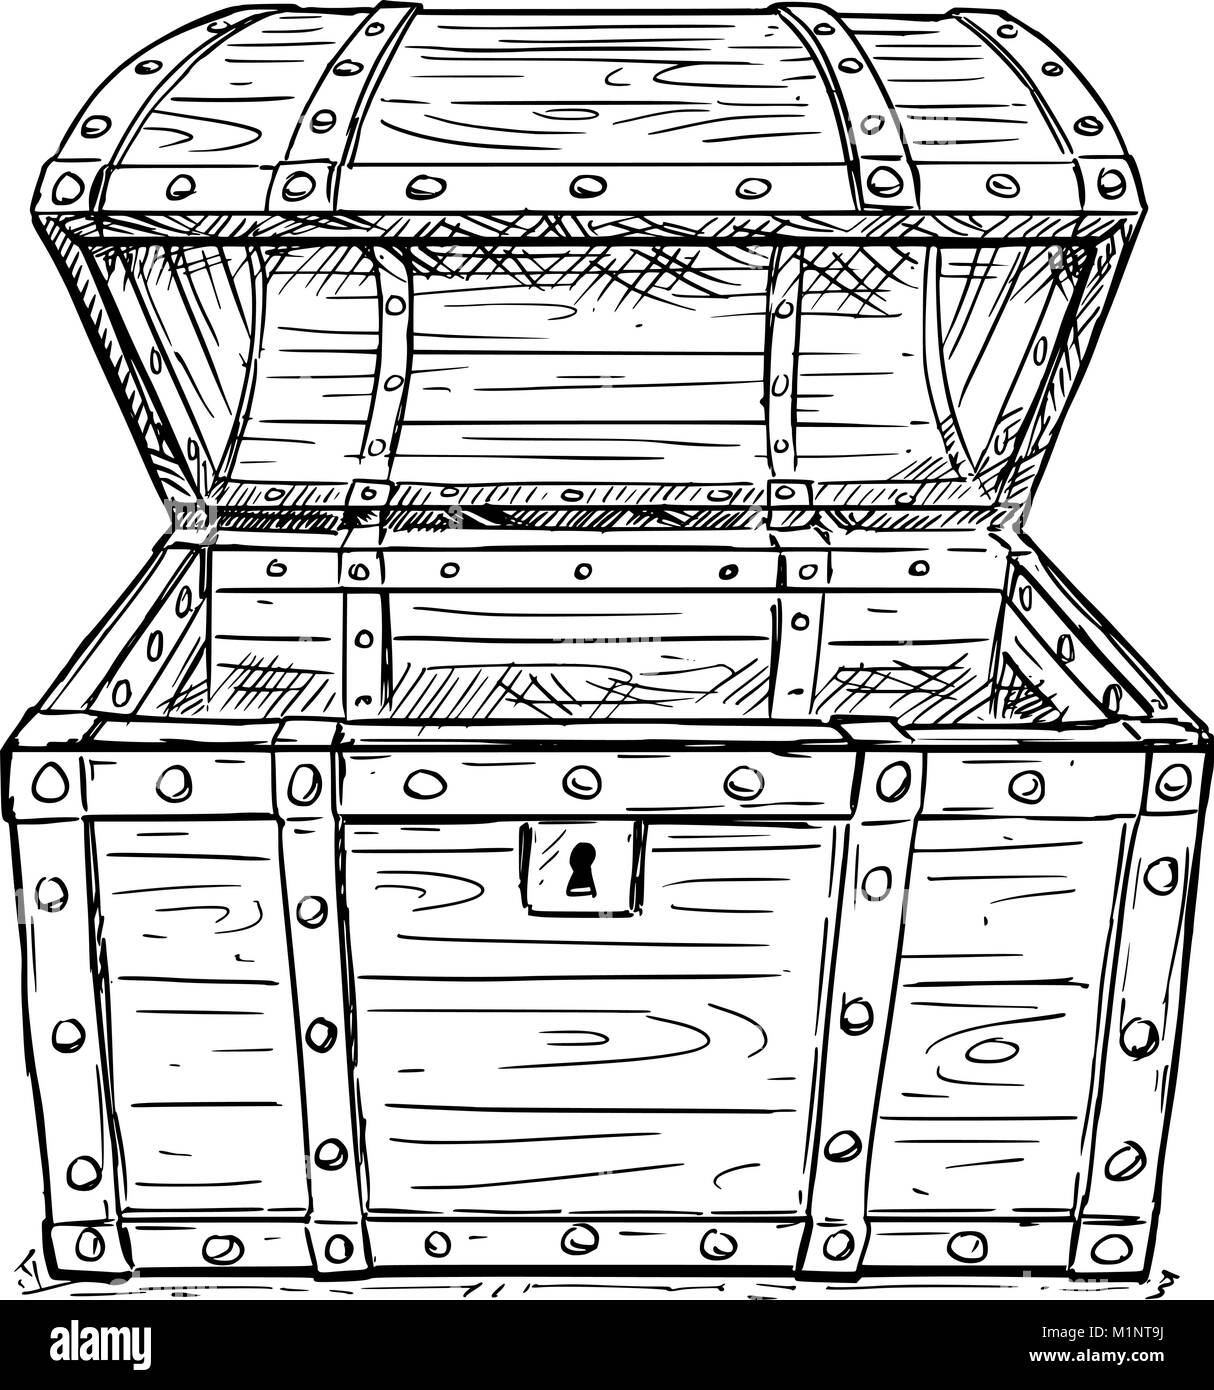 Cartoon Vector Drawing of Old Empty Open Pirate Chest Stock Vector